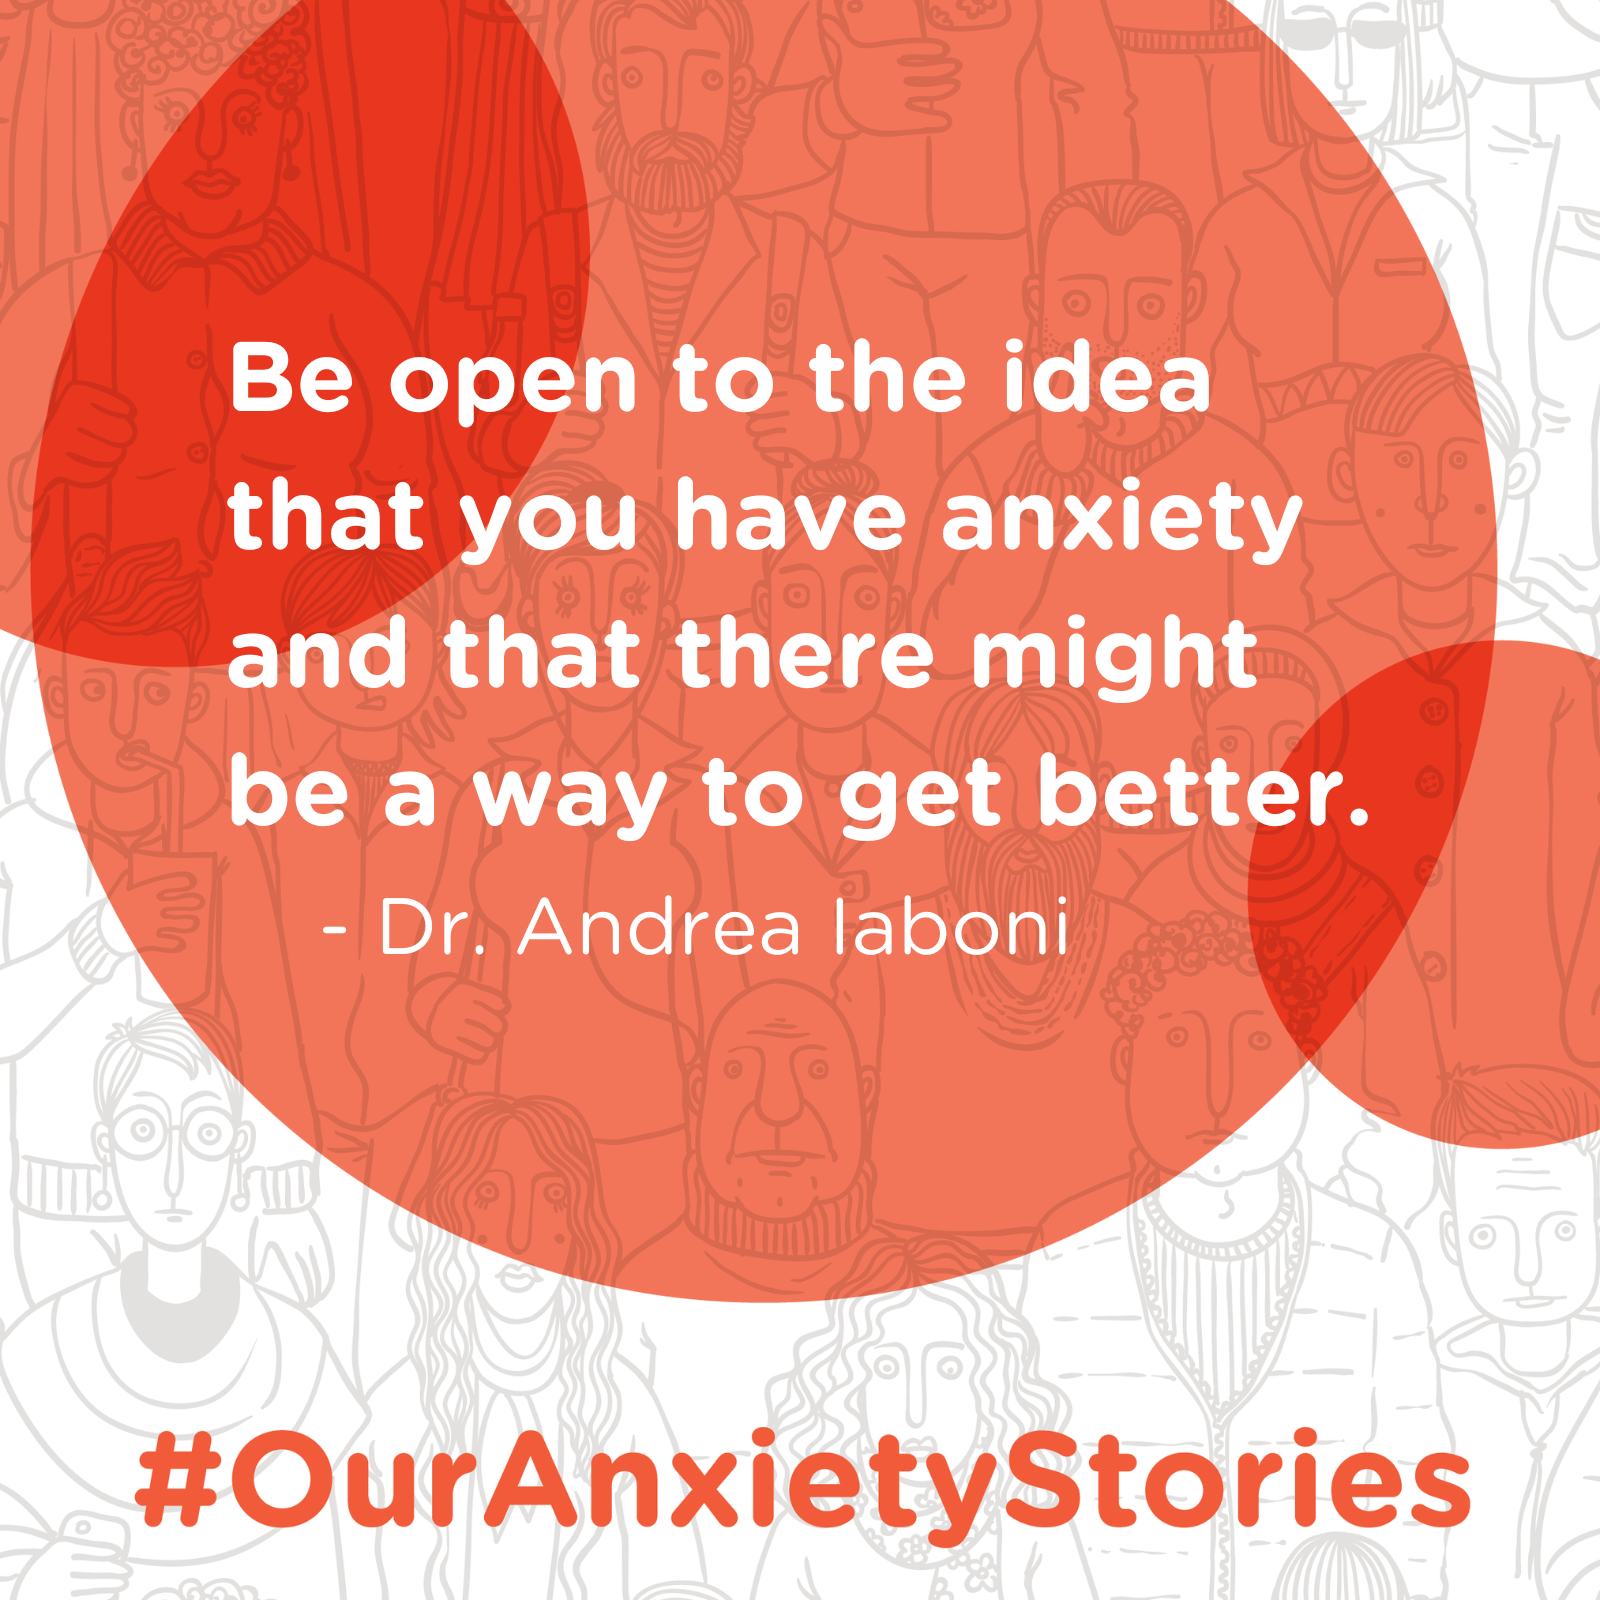 Quote by Dr. Andrea Iaboni on the Our Anxiety Stories Podcast: "Be open to the idea that you have anxiety and that there may be a way to get better."